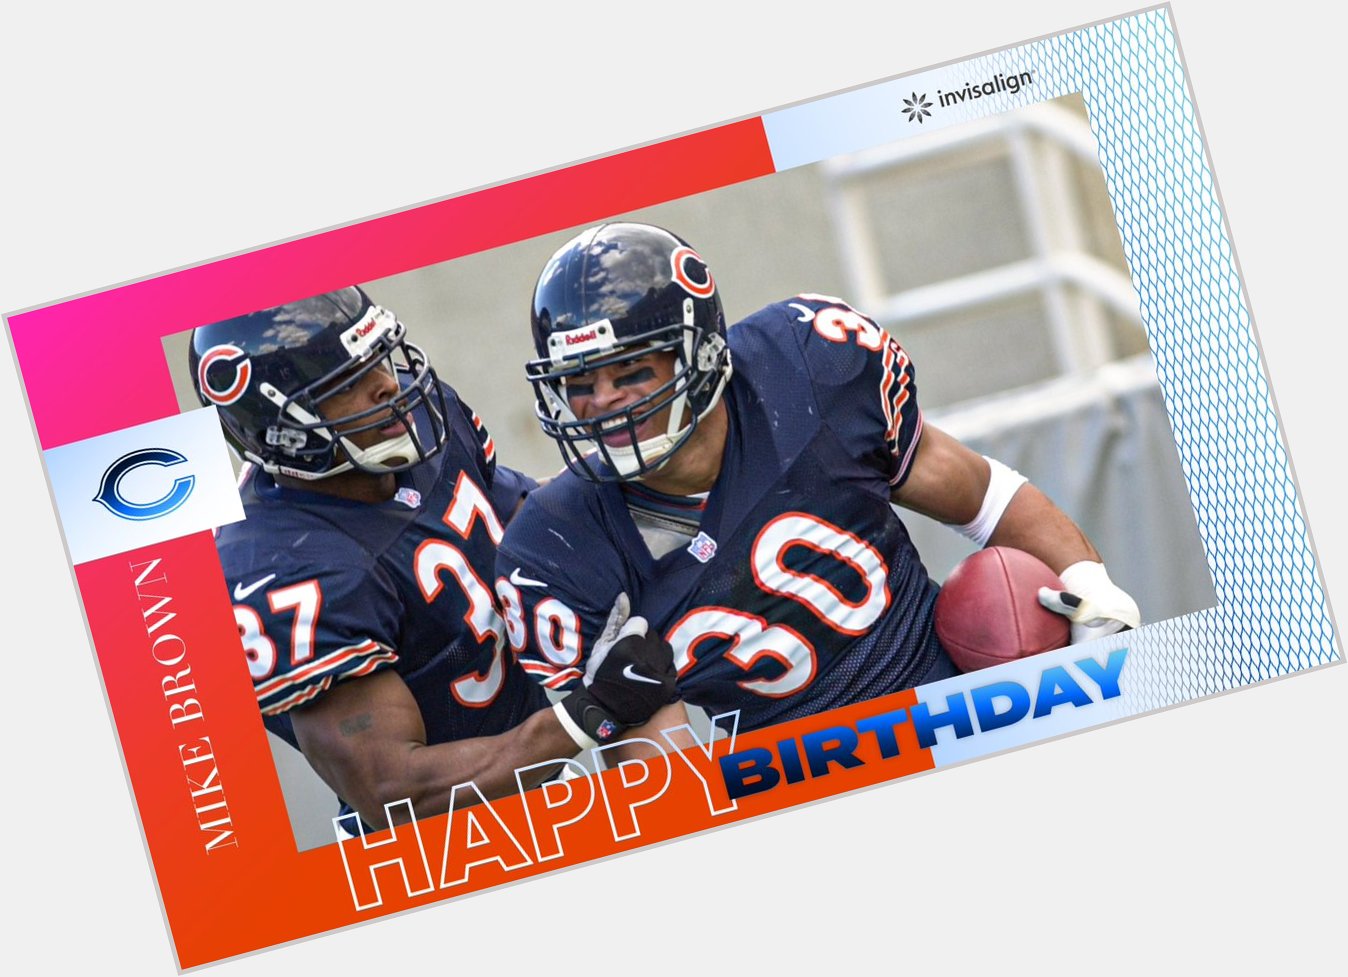 Wishing a happy birthday to former Bear Mike Brown! 